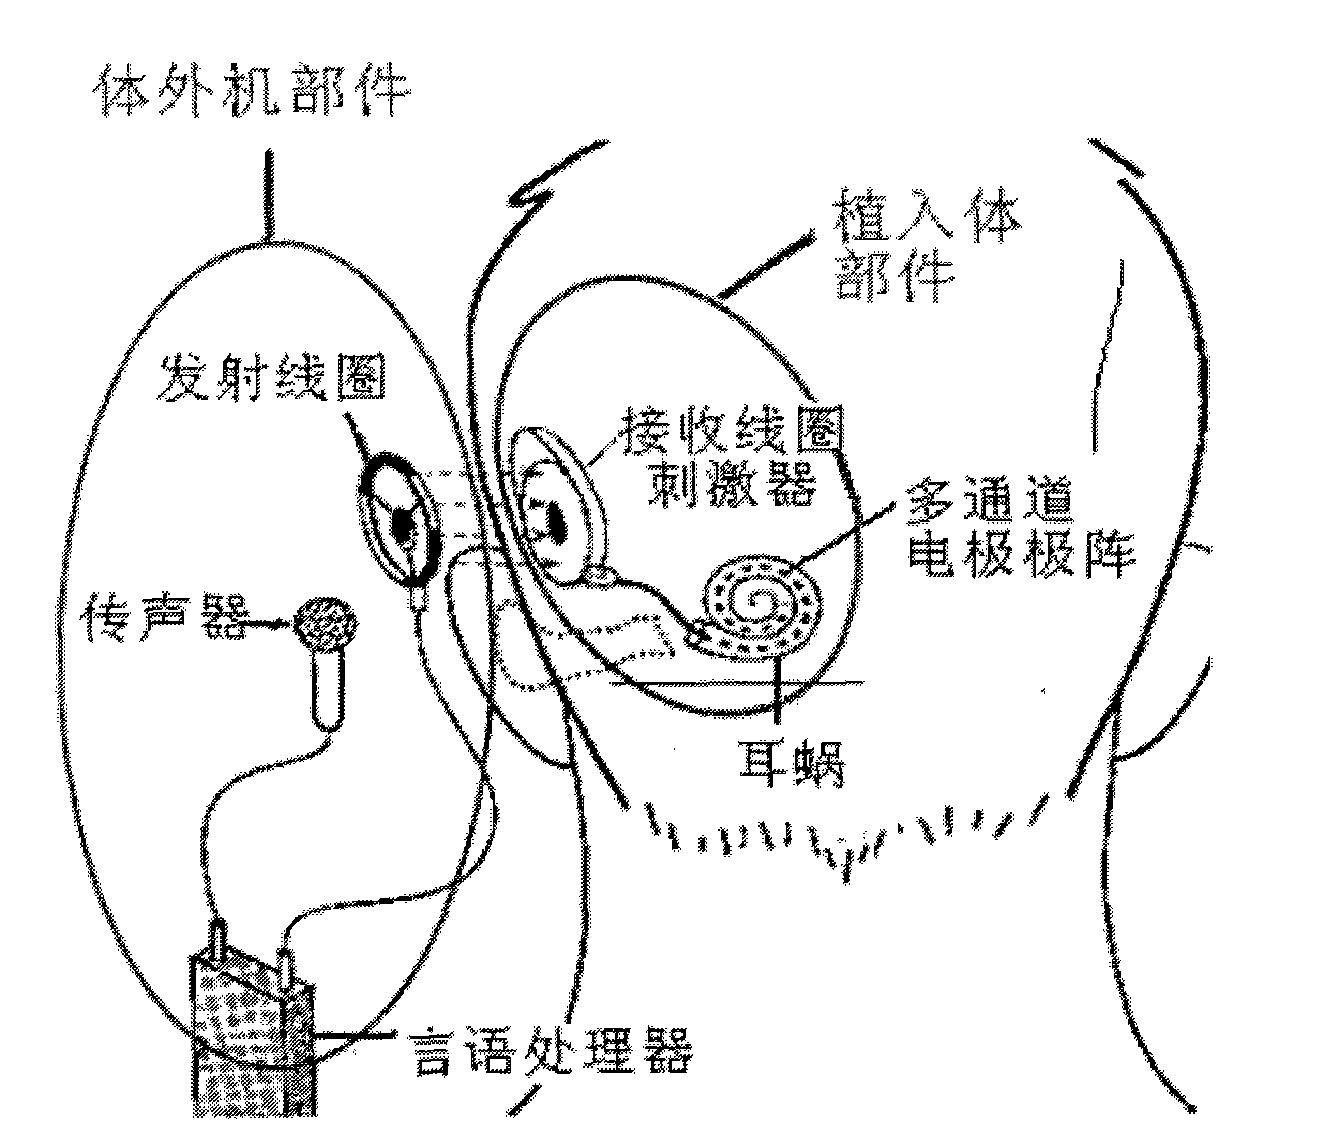 Artificial electronic cochlea and method for processing speech with double stimulation rates